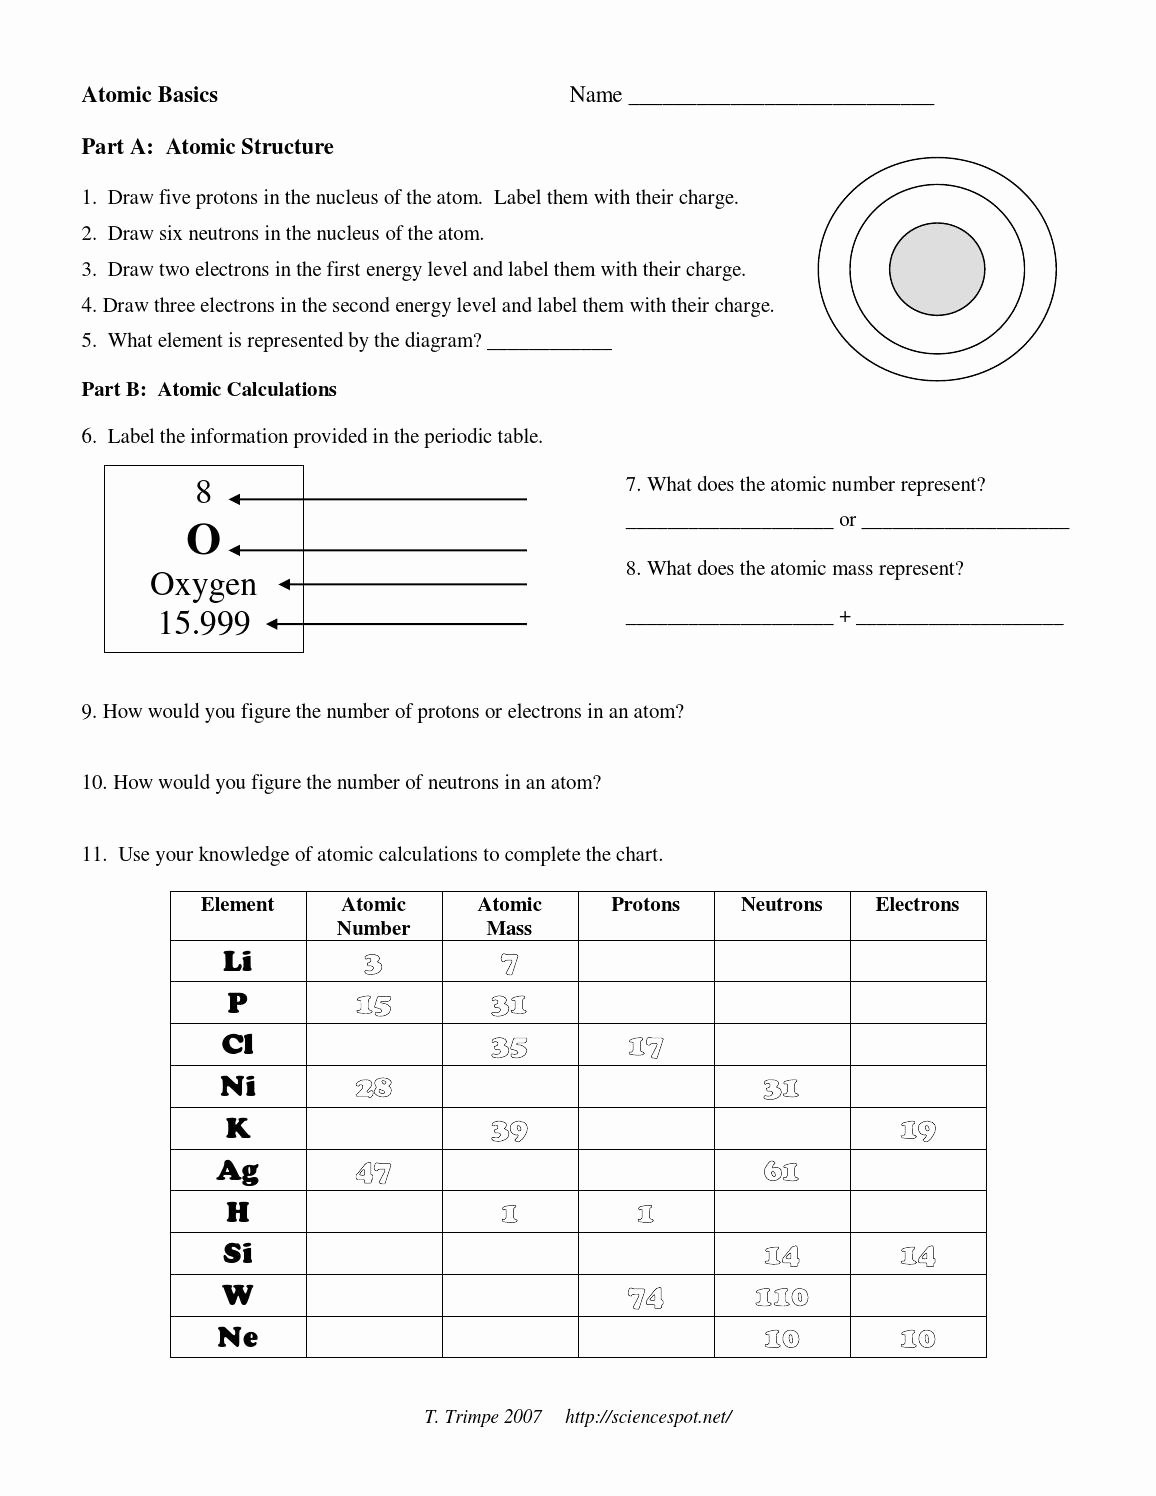 Structure Of the atom Worksheet atom Structure Worksheet Elementary